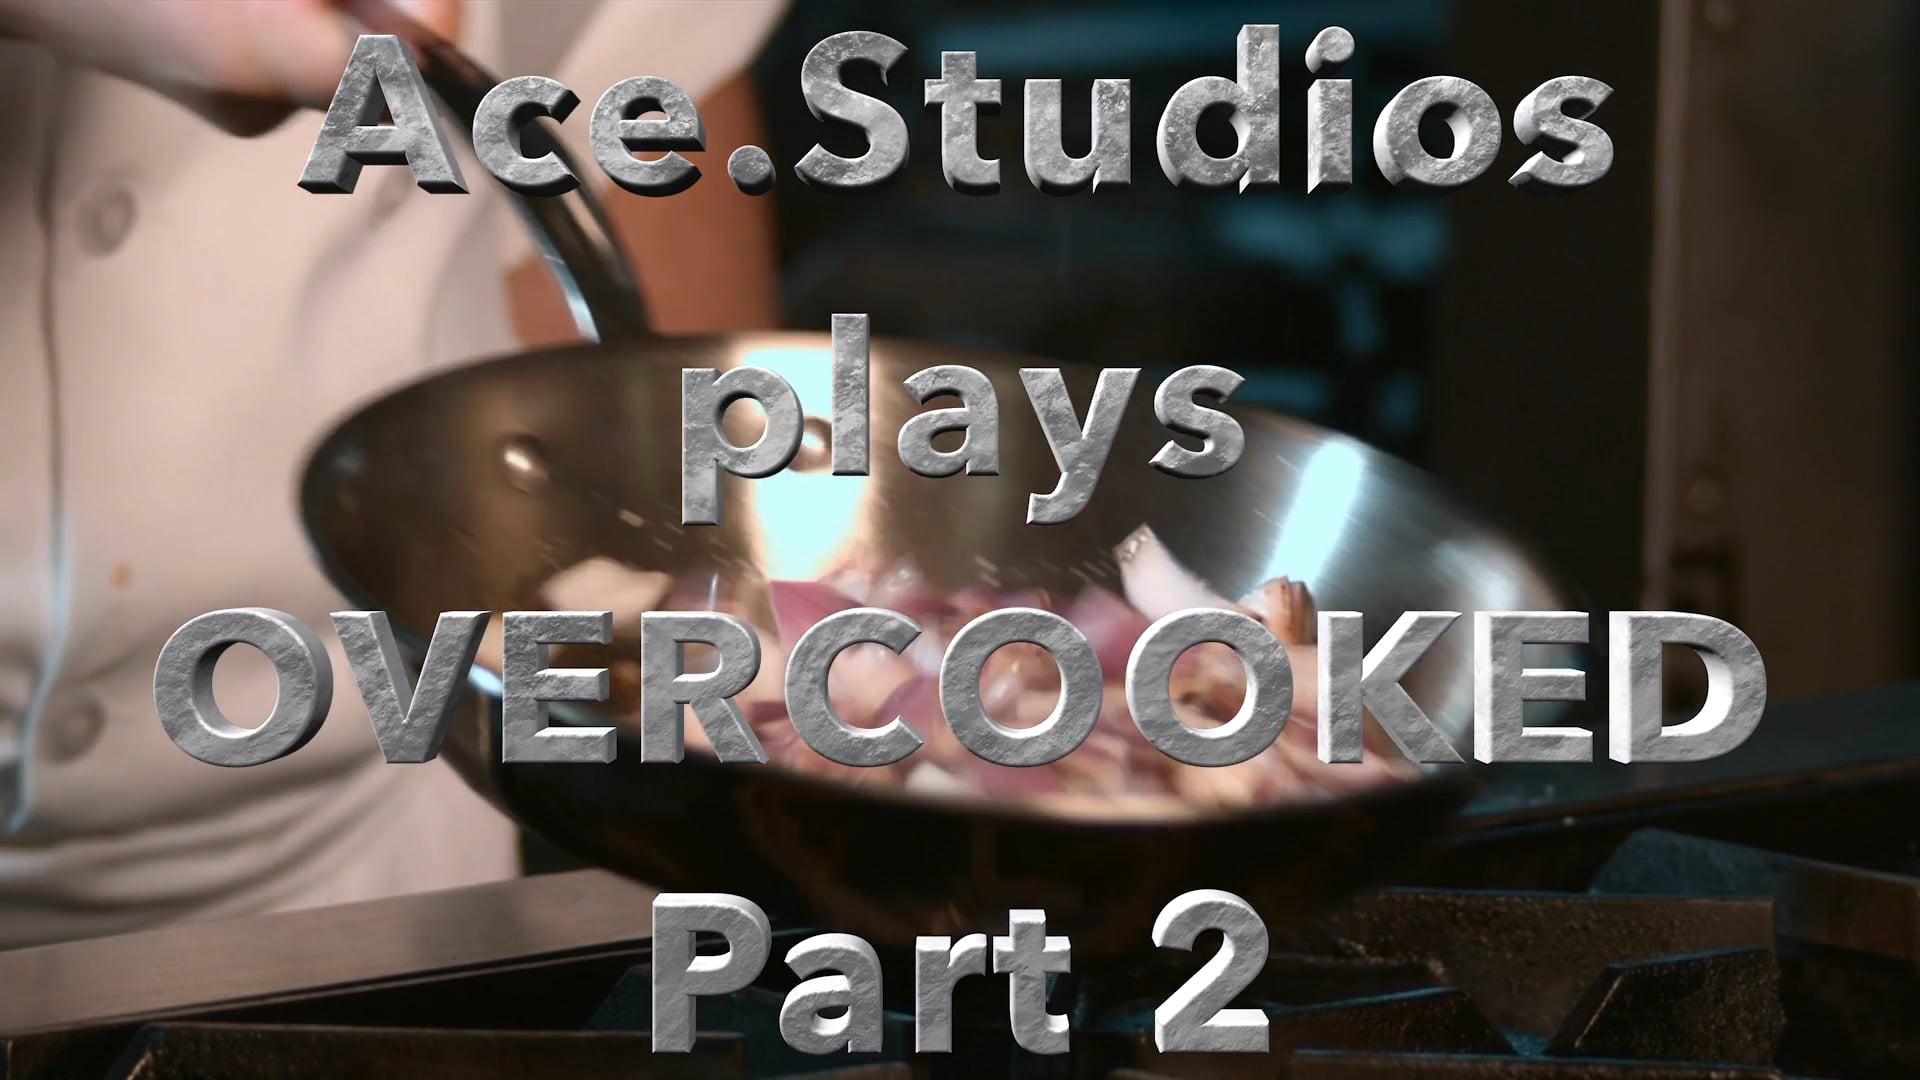 Ace.studios plays Overcooked Part 2 This is the god of cooking saying F you